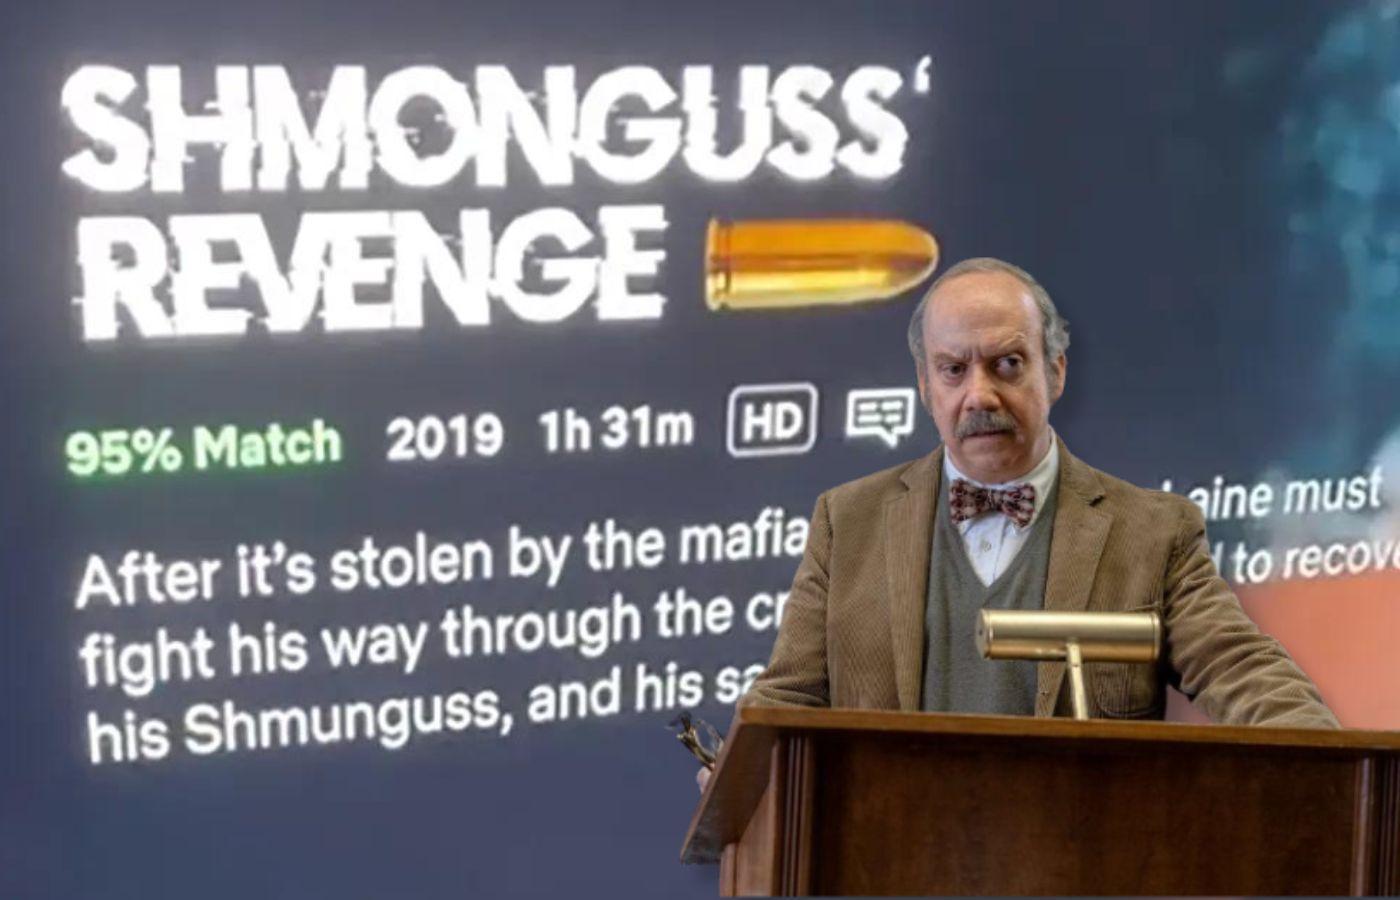 Paul Giamatti in The Holdovers and the bogus Shmunguss category on Netflix